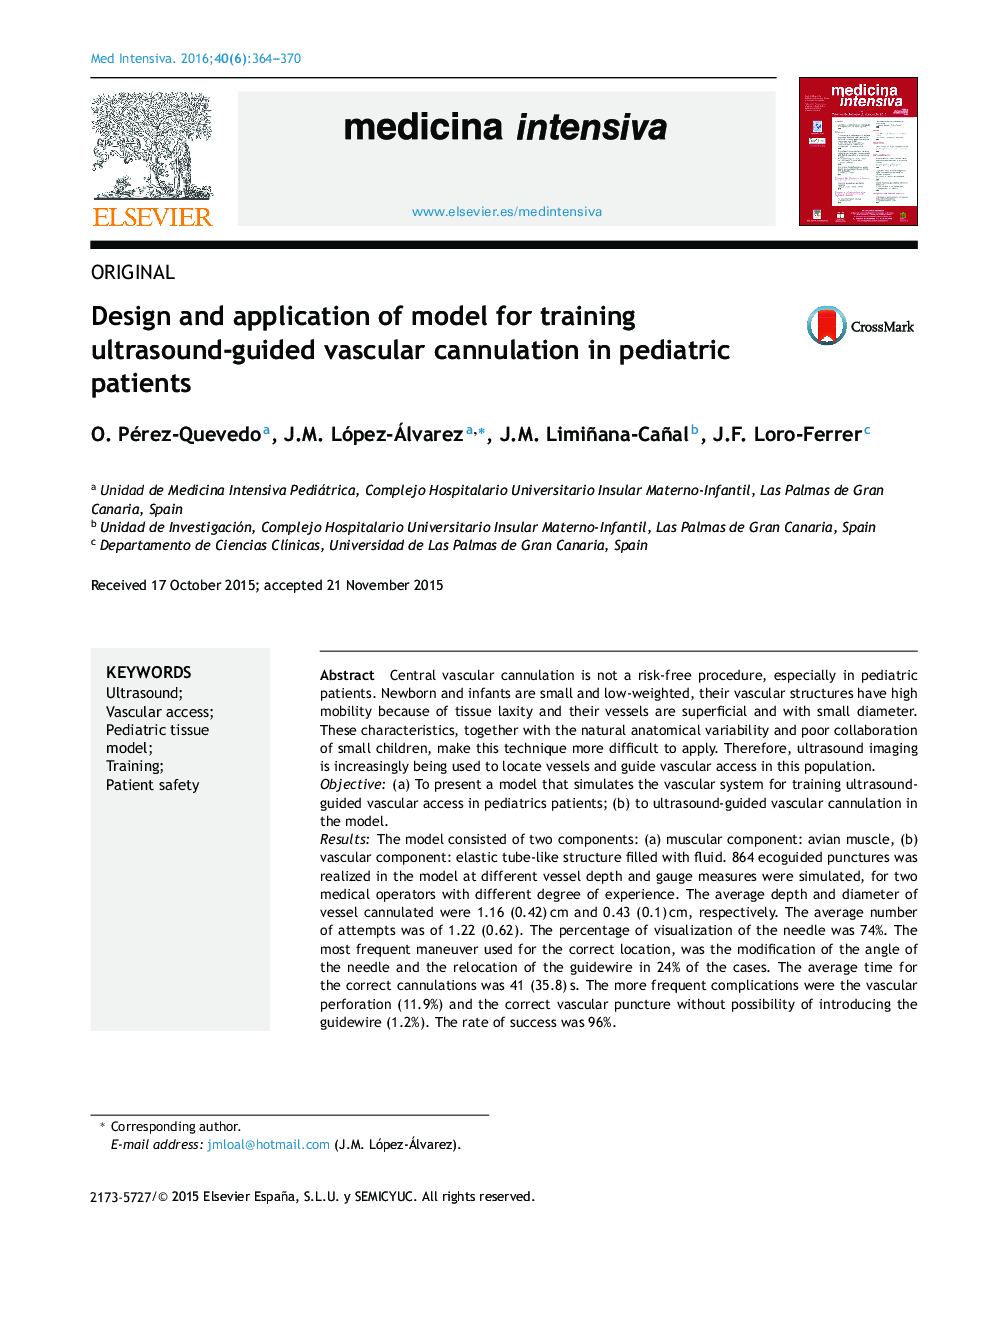 Design and application of model for training ultrasound-guided vascular cannulation in pediatric patients